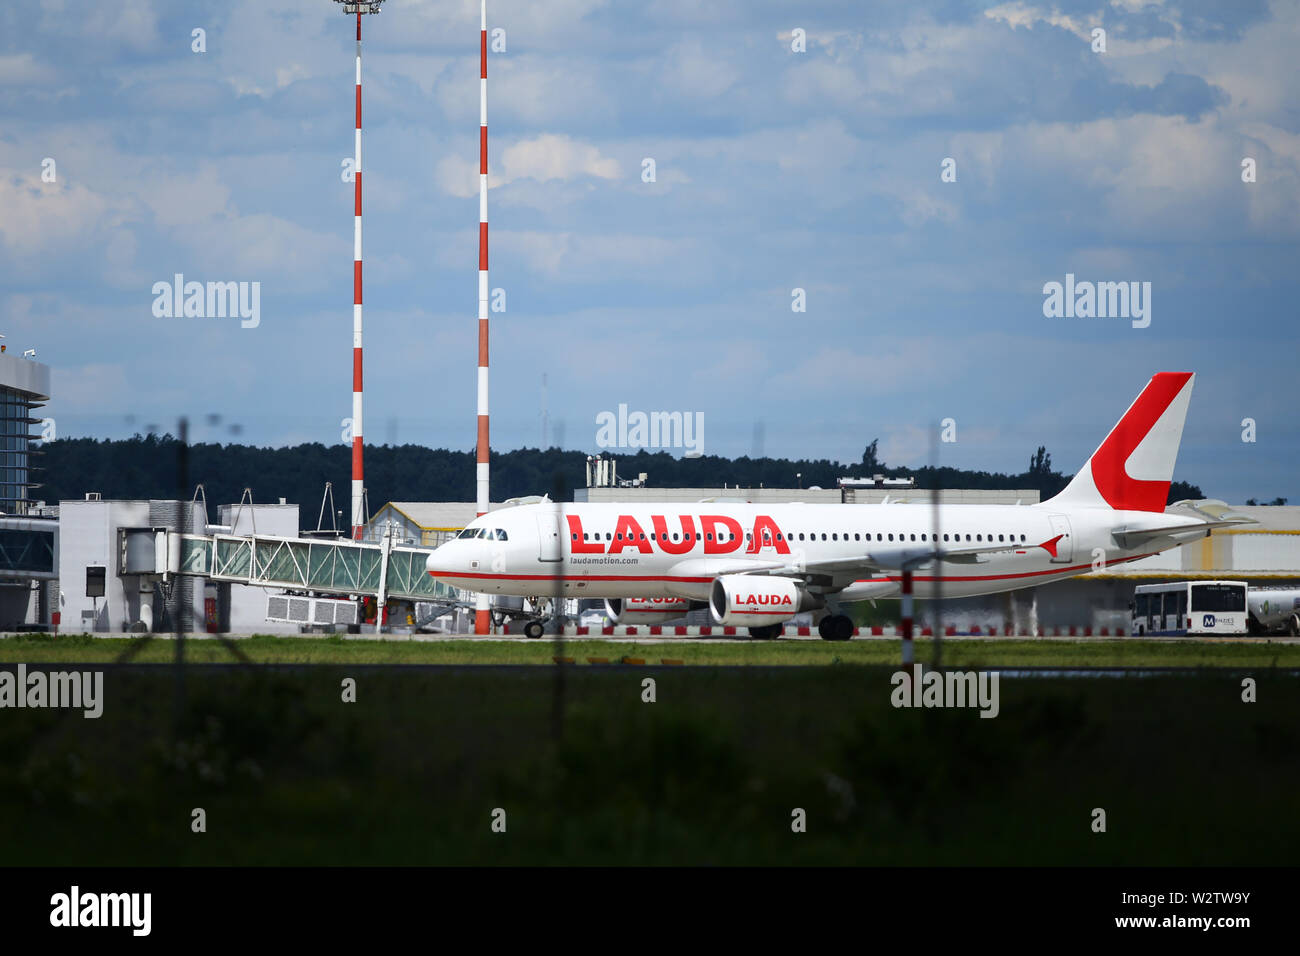 Otopeni, Romania - May 22, 2019: A Lauda commercial airplane is taking off from the Henri Coanda International Airport. Stock Photo